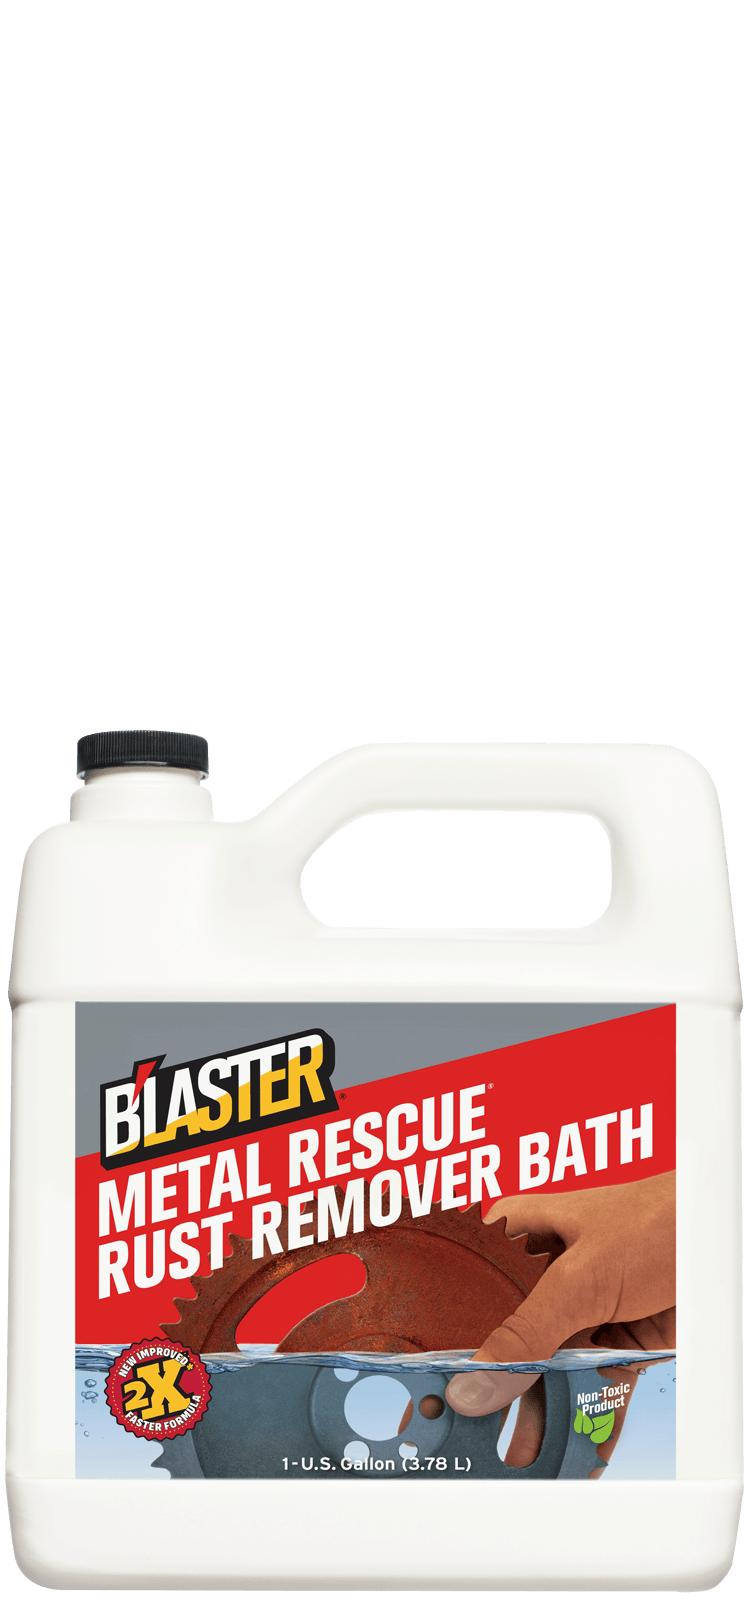 Rust remover for removing rust from steel